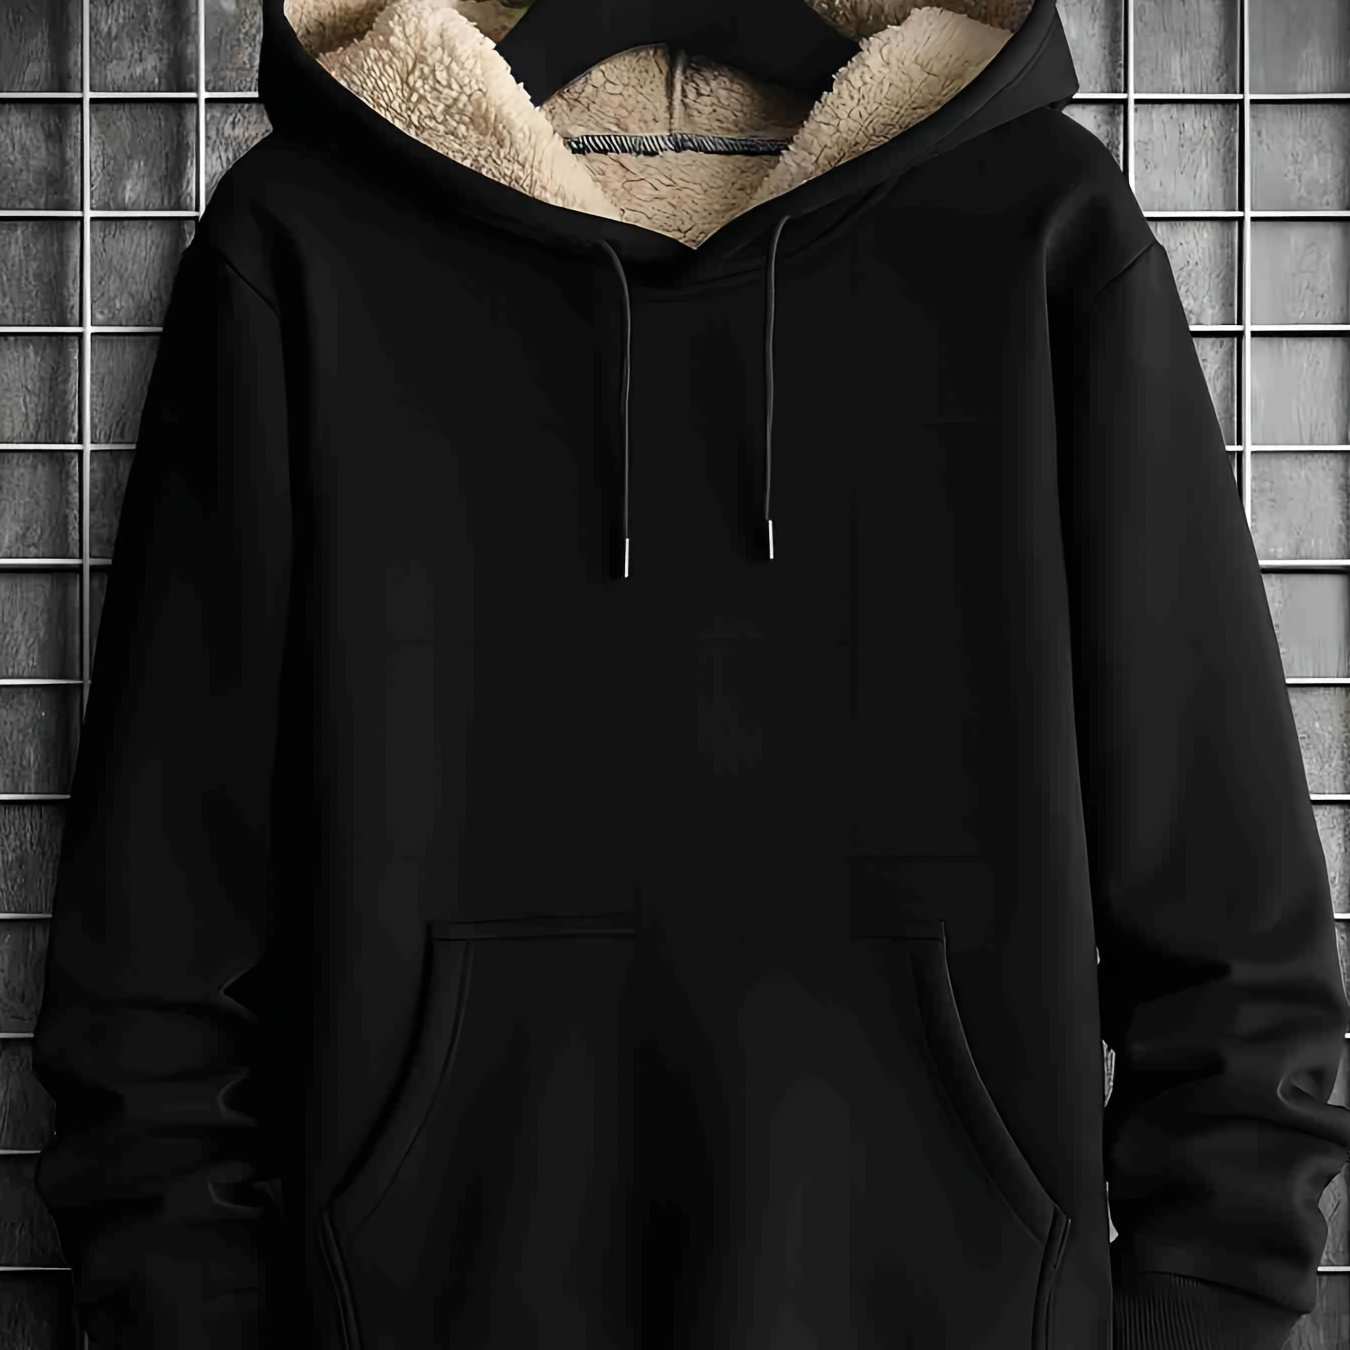 

Solid Warmhoodie, Cool Fleece Hoodies For Men, Men's Casual Graphic Design Hooded Sweatshirt With Kangaroo Pocket Streetwear For Winter Fall, As Gifts